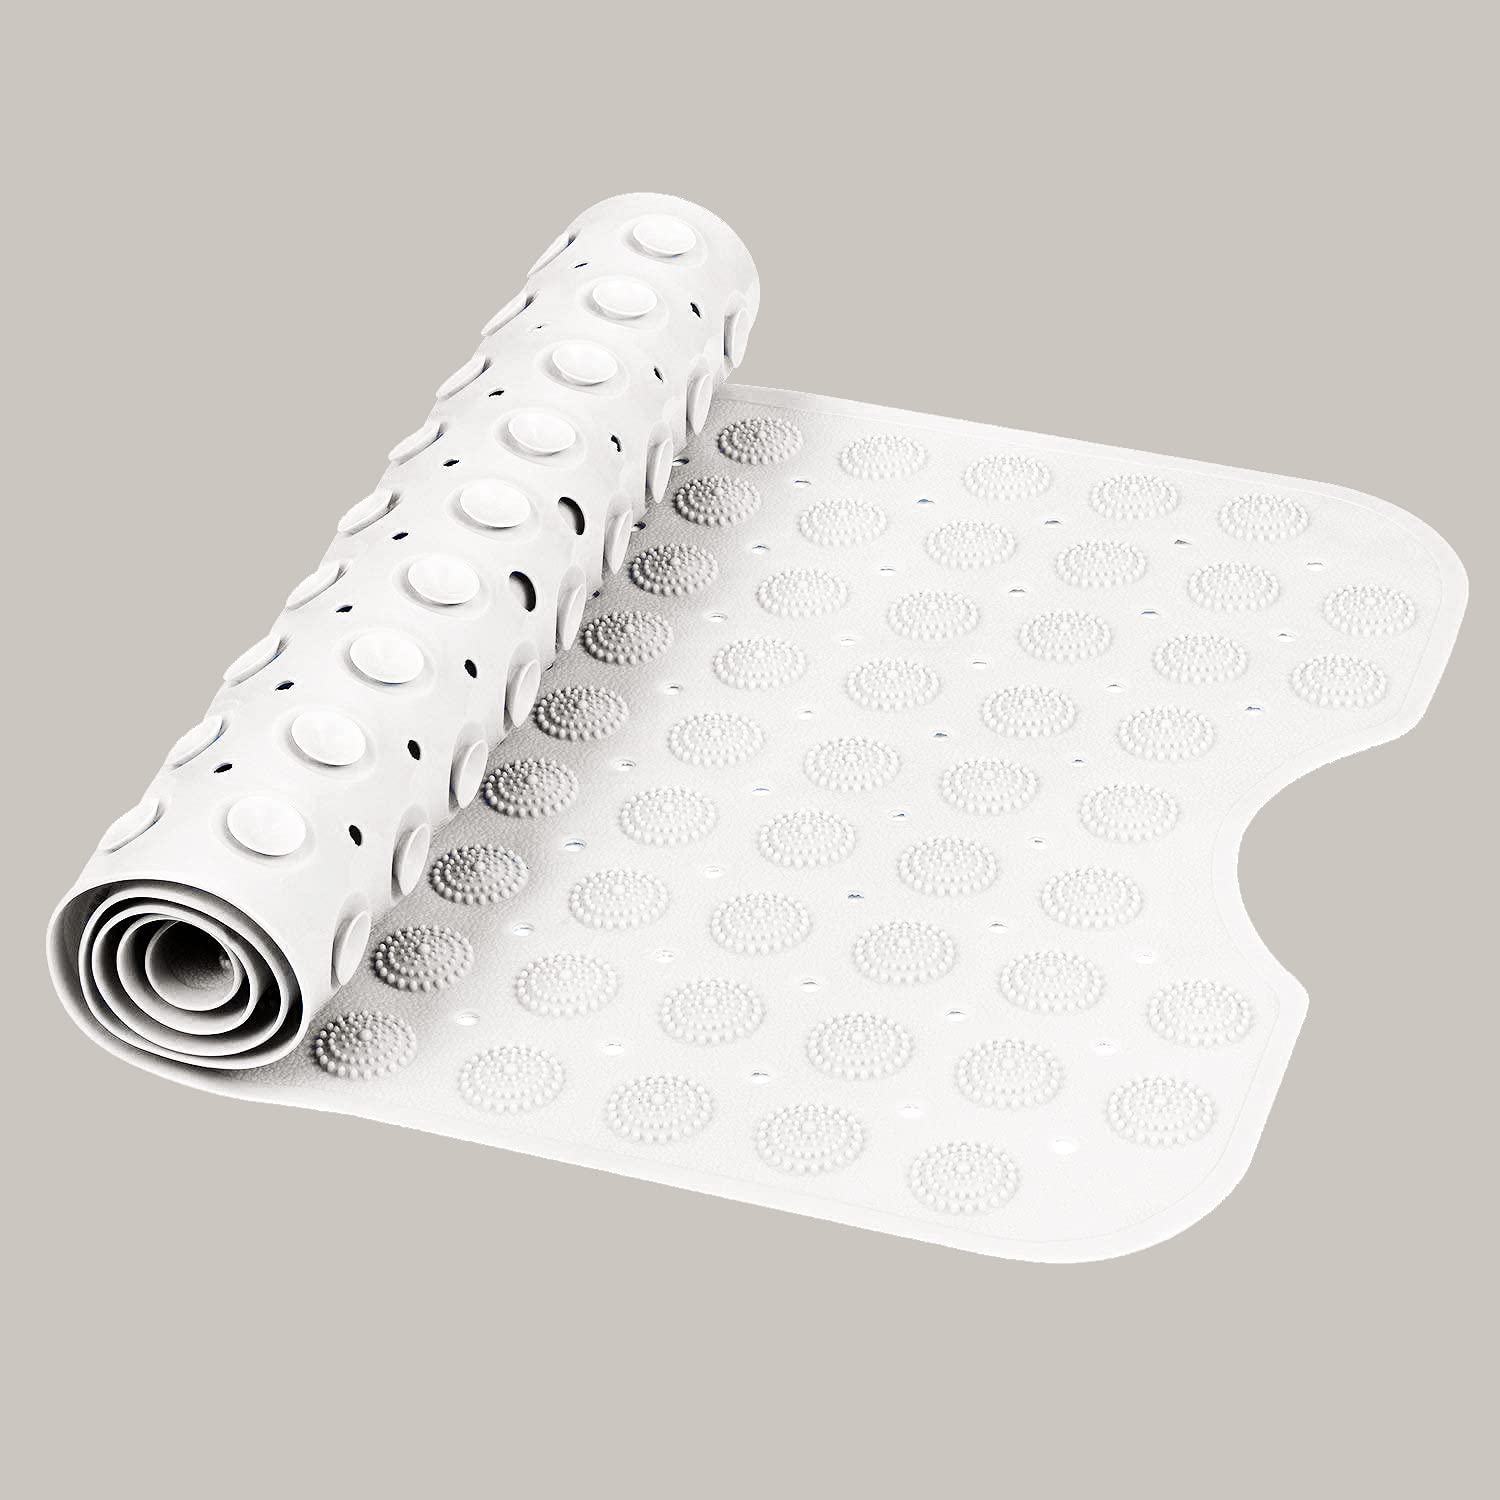 Experia Anti Slip Bath Mat with Suction Cup - 100*40 cm (White Color with Accu Pebble) LifeKrafts